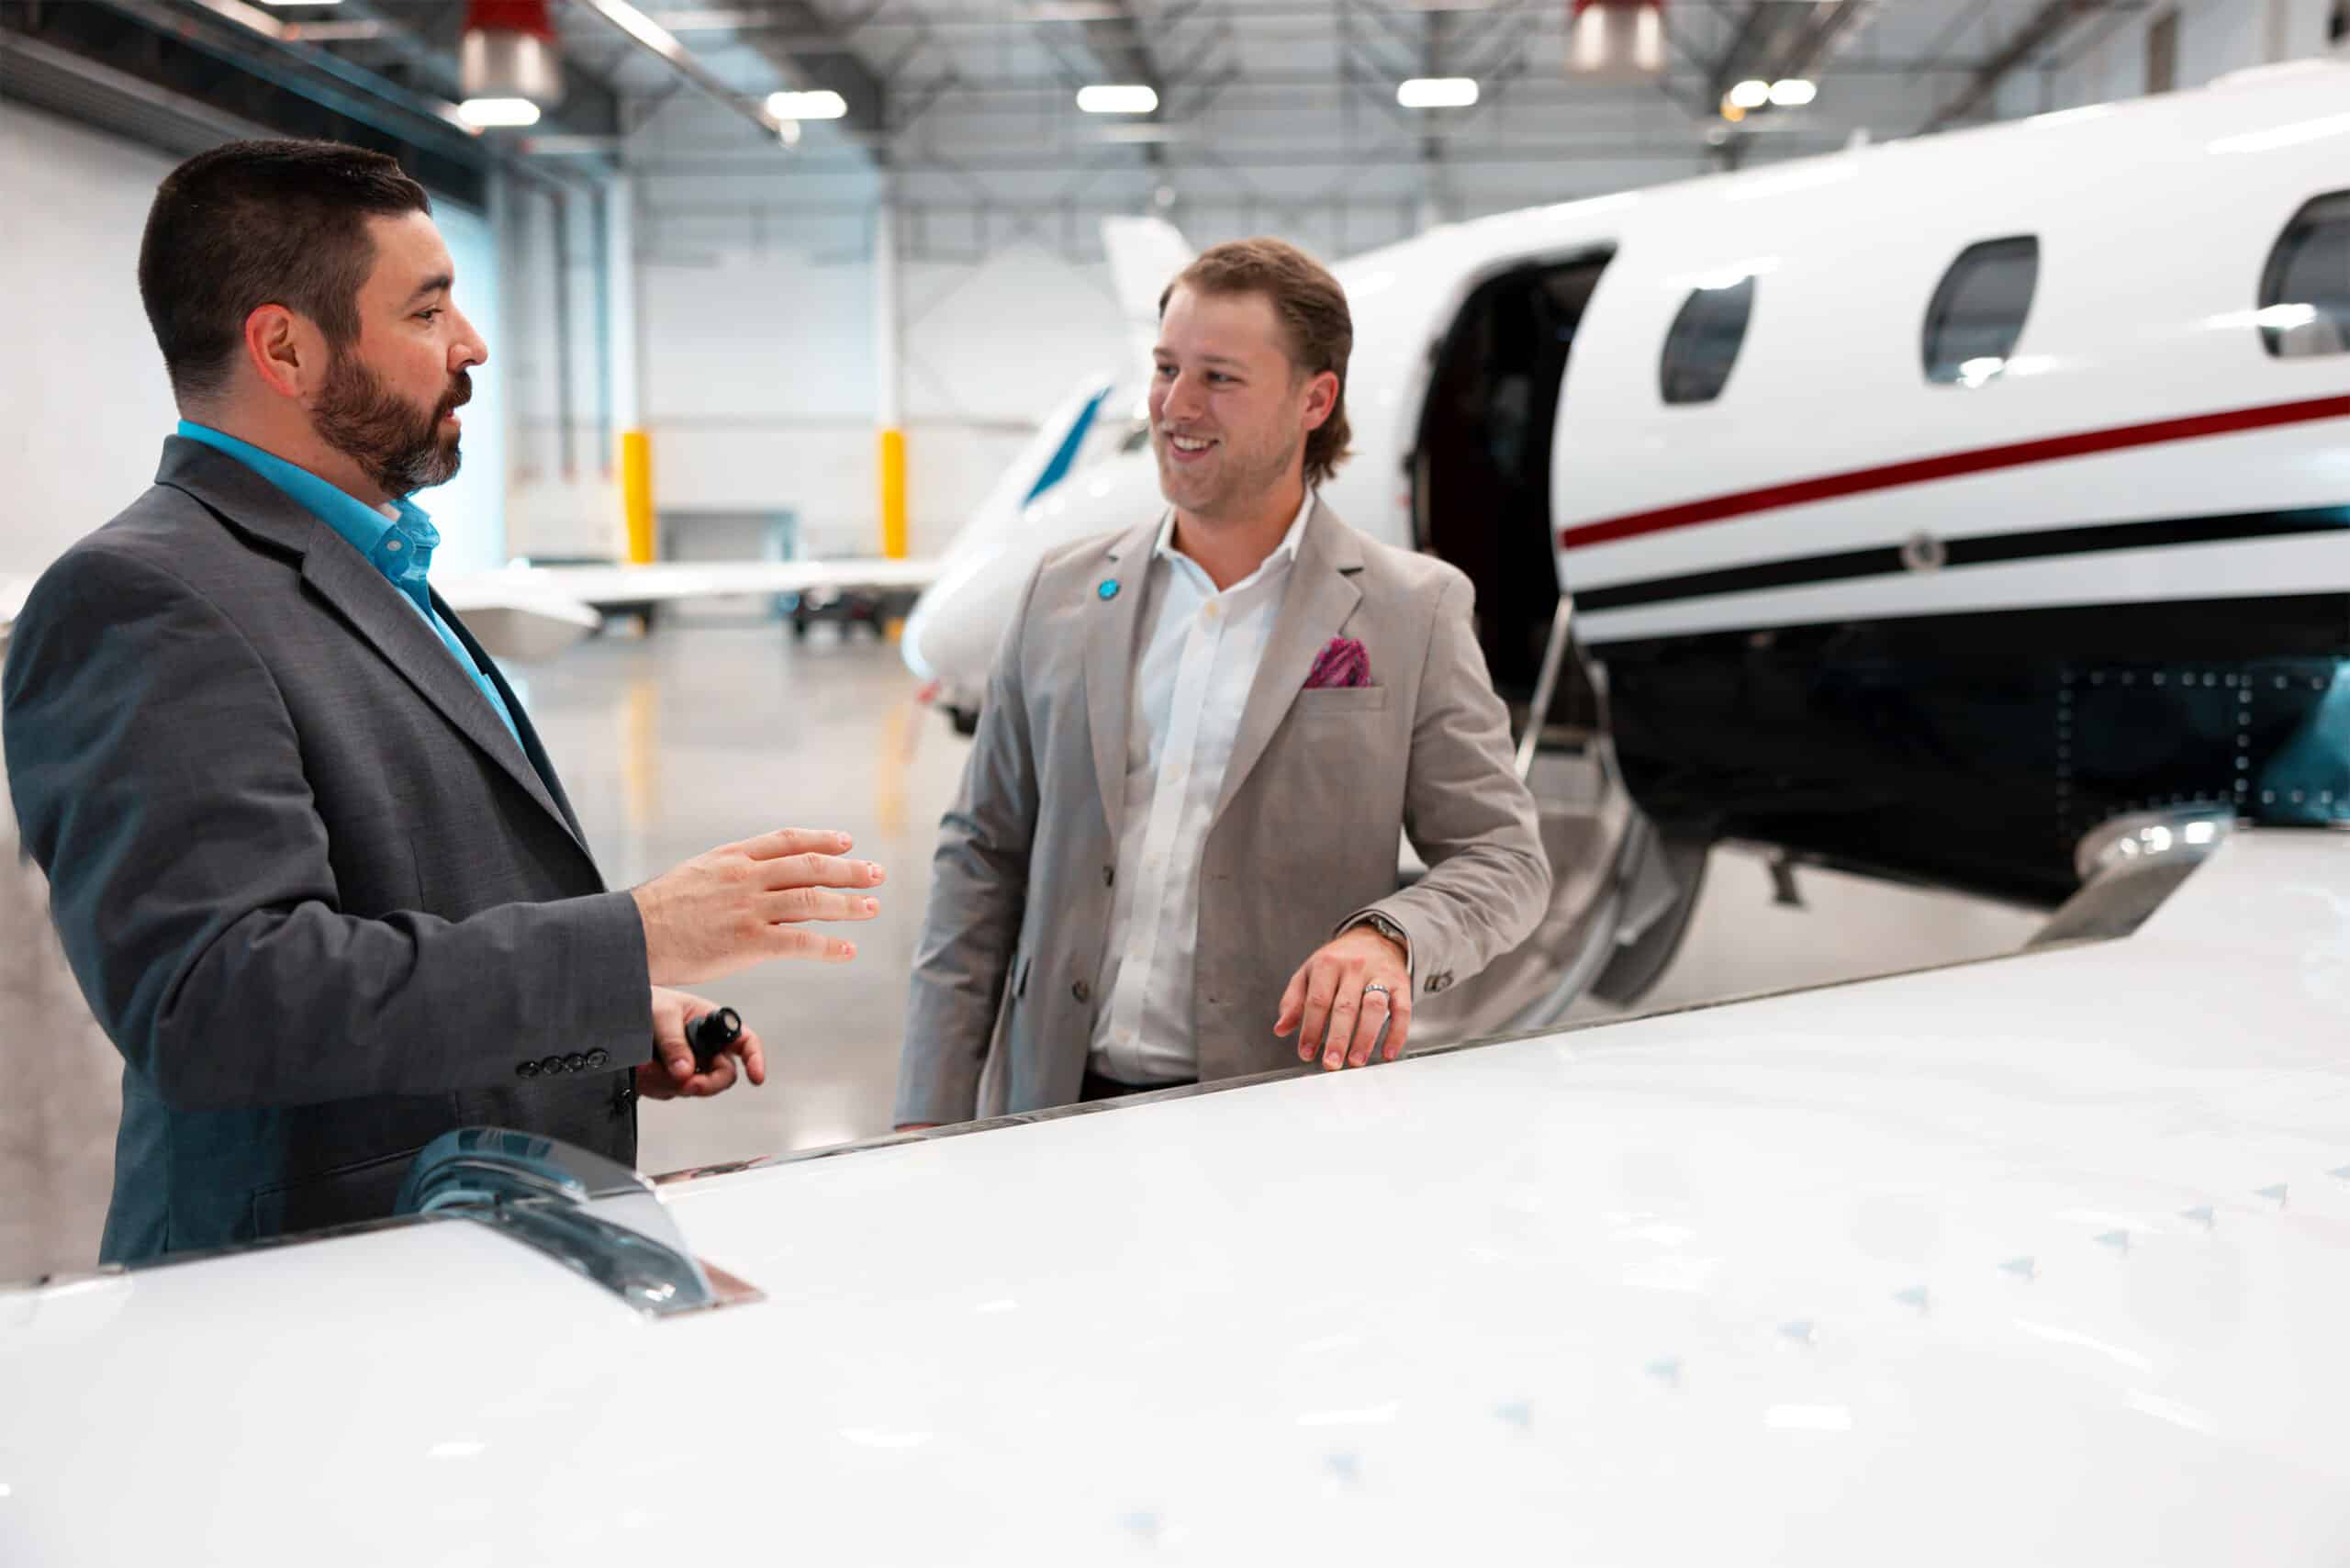 Brandon Steele - A young professional in the business aviation industry being mentored by Michael Barber.